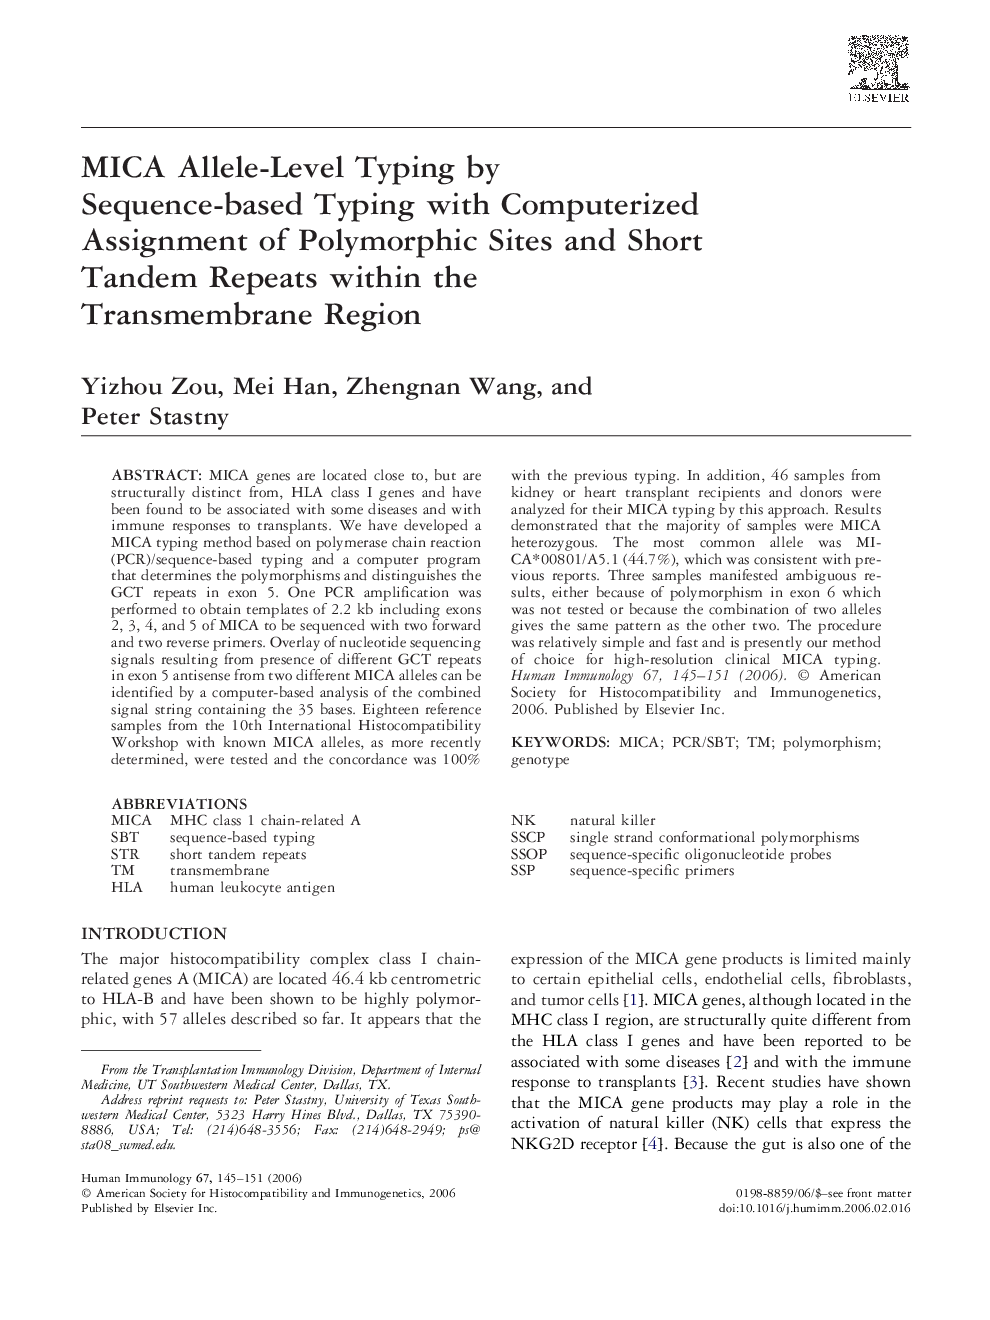 MICA Allele-Level Typing by Sequence-based Typing with Computerized Assignment of Polymorphic Sites and Short Tandem Repeats within the Transmembrane Region